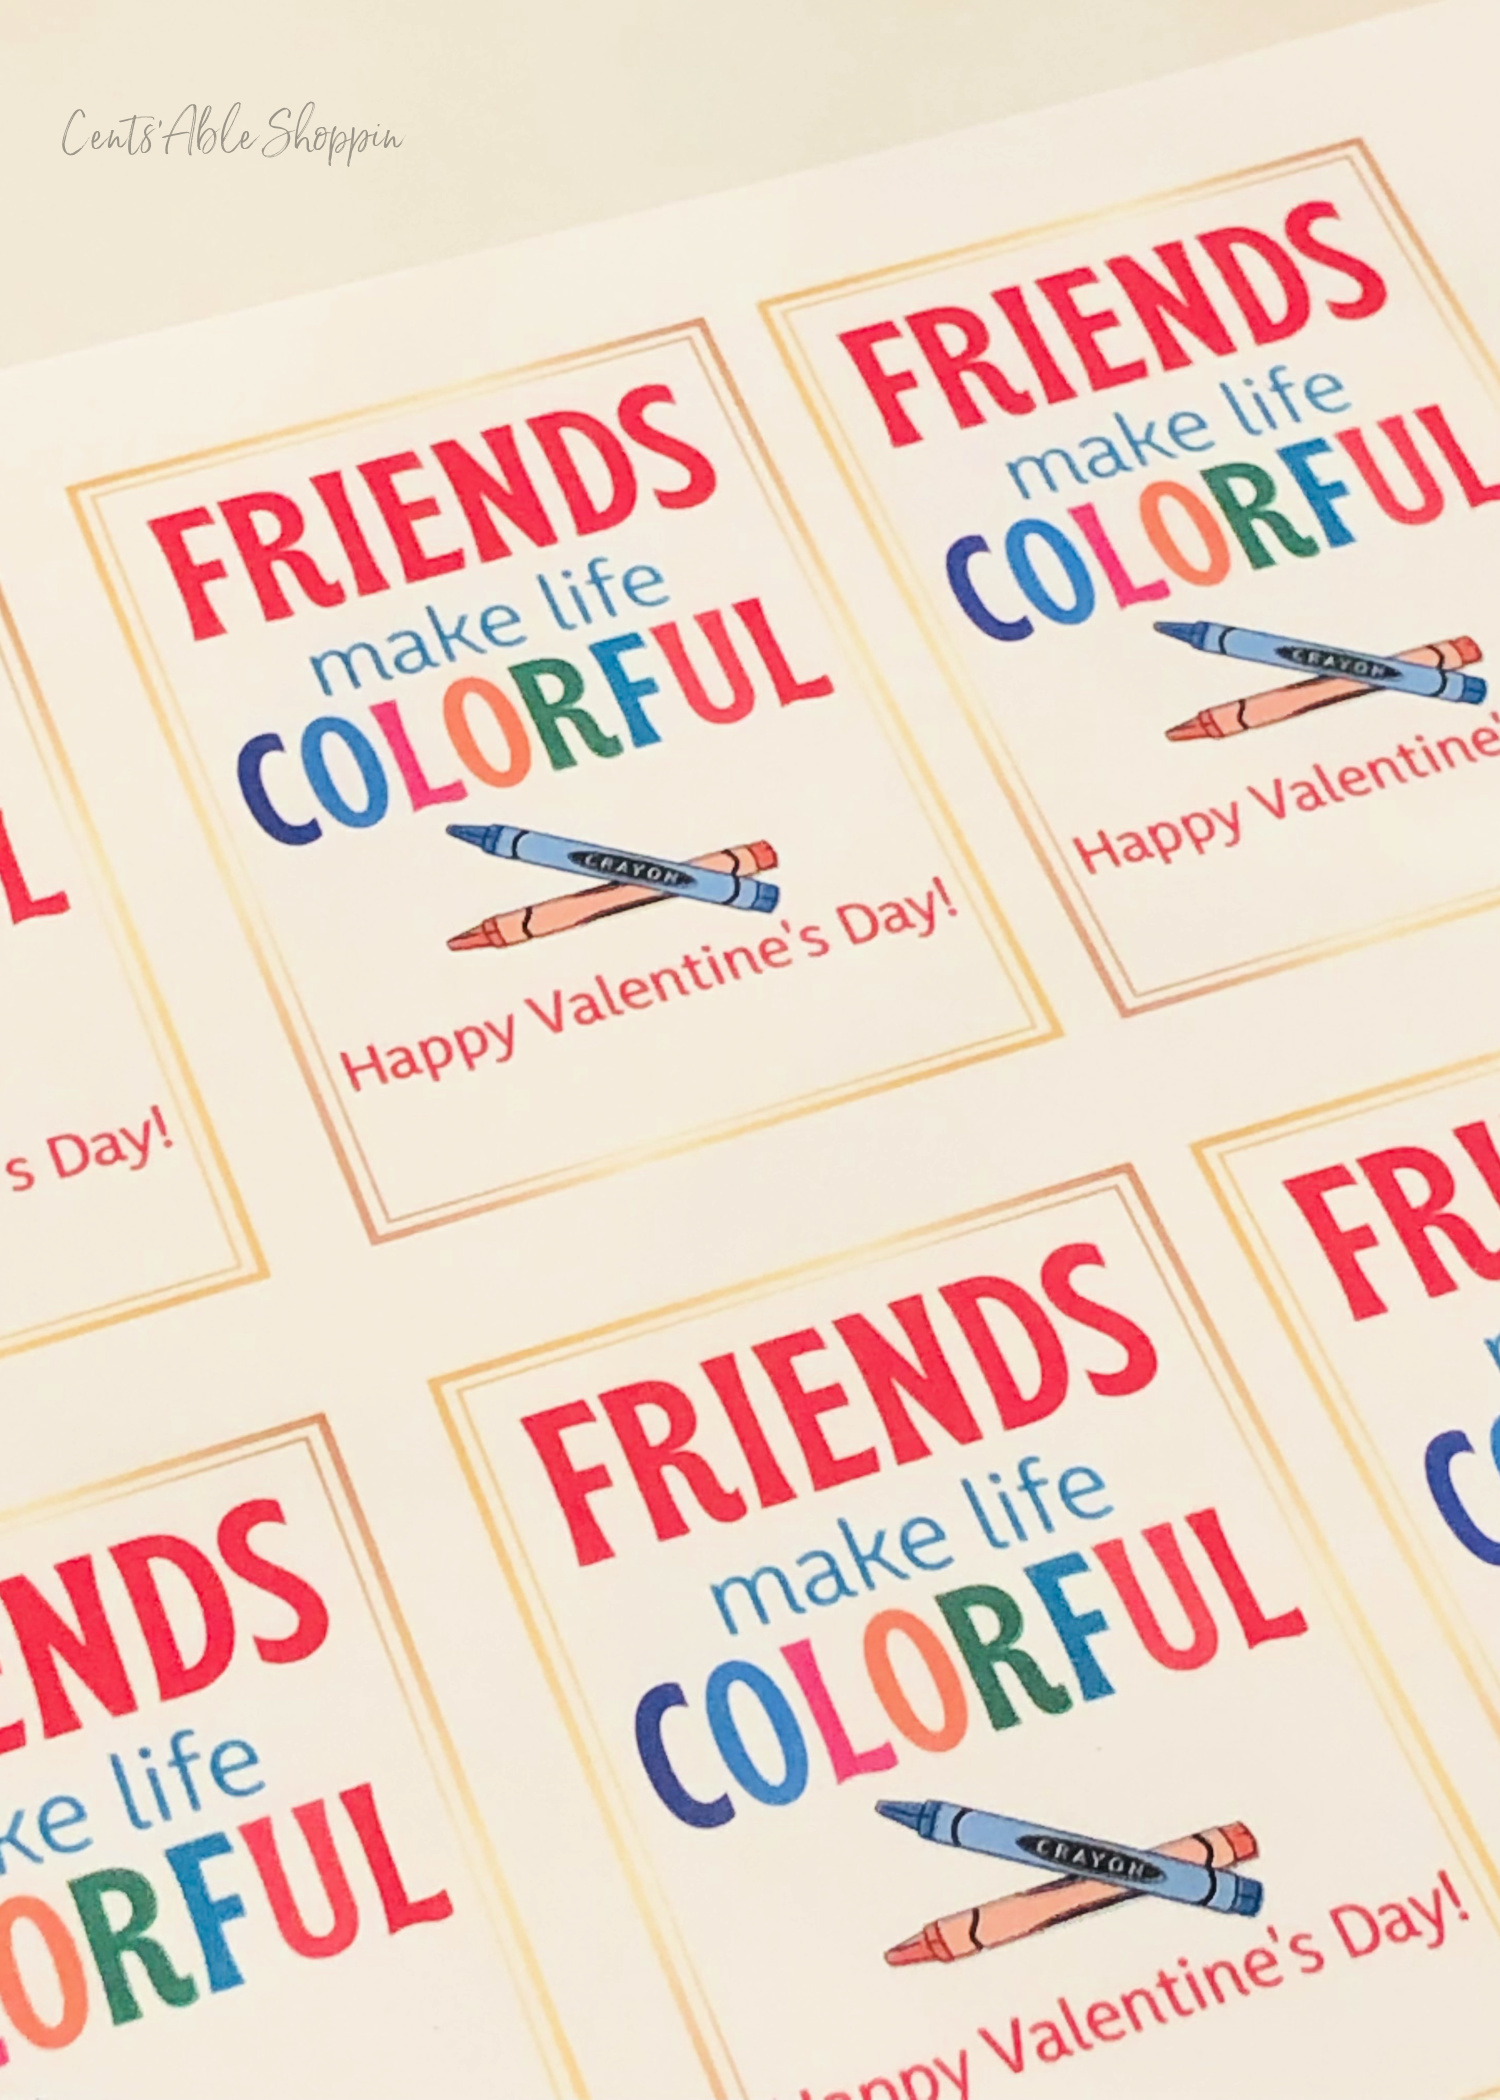 Friends Make Life Colorful! Grab this FREE printable Valentine and attach some crayons for a fun and unique Valentine idea!